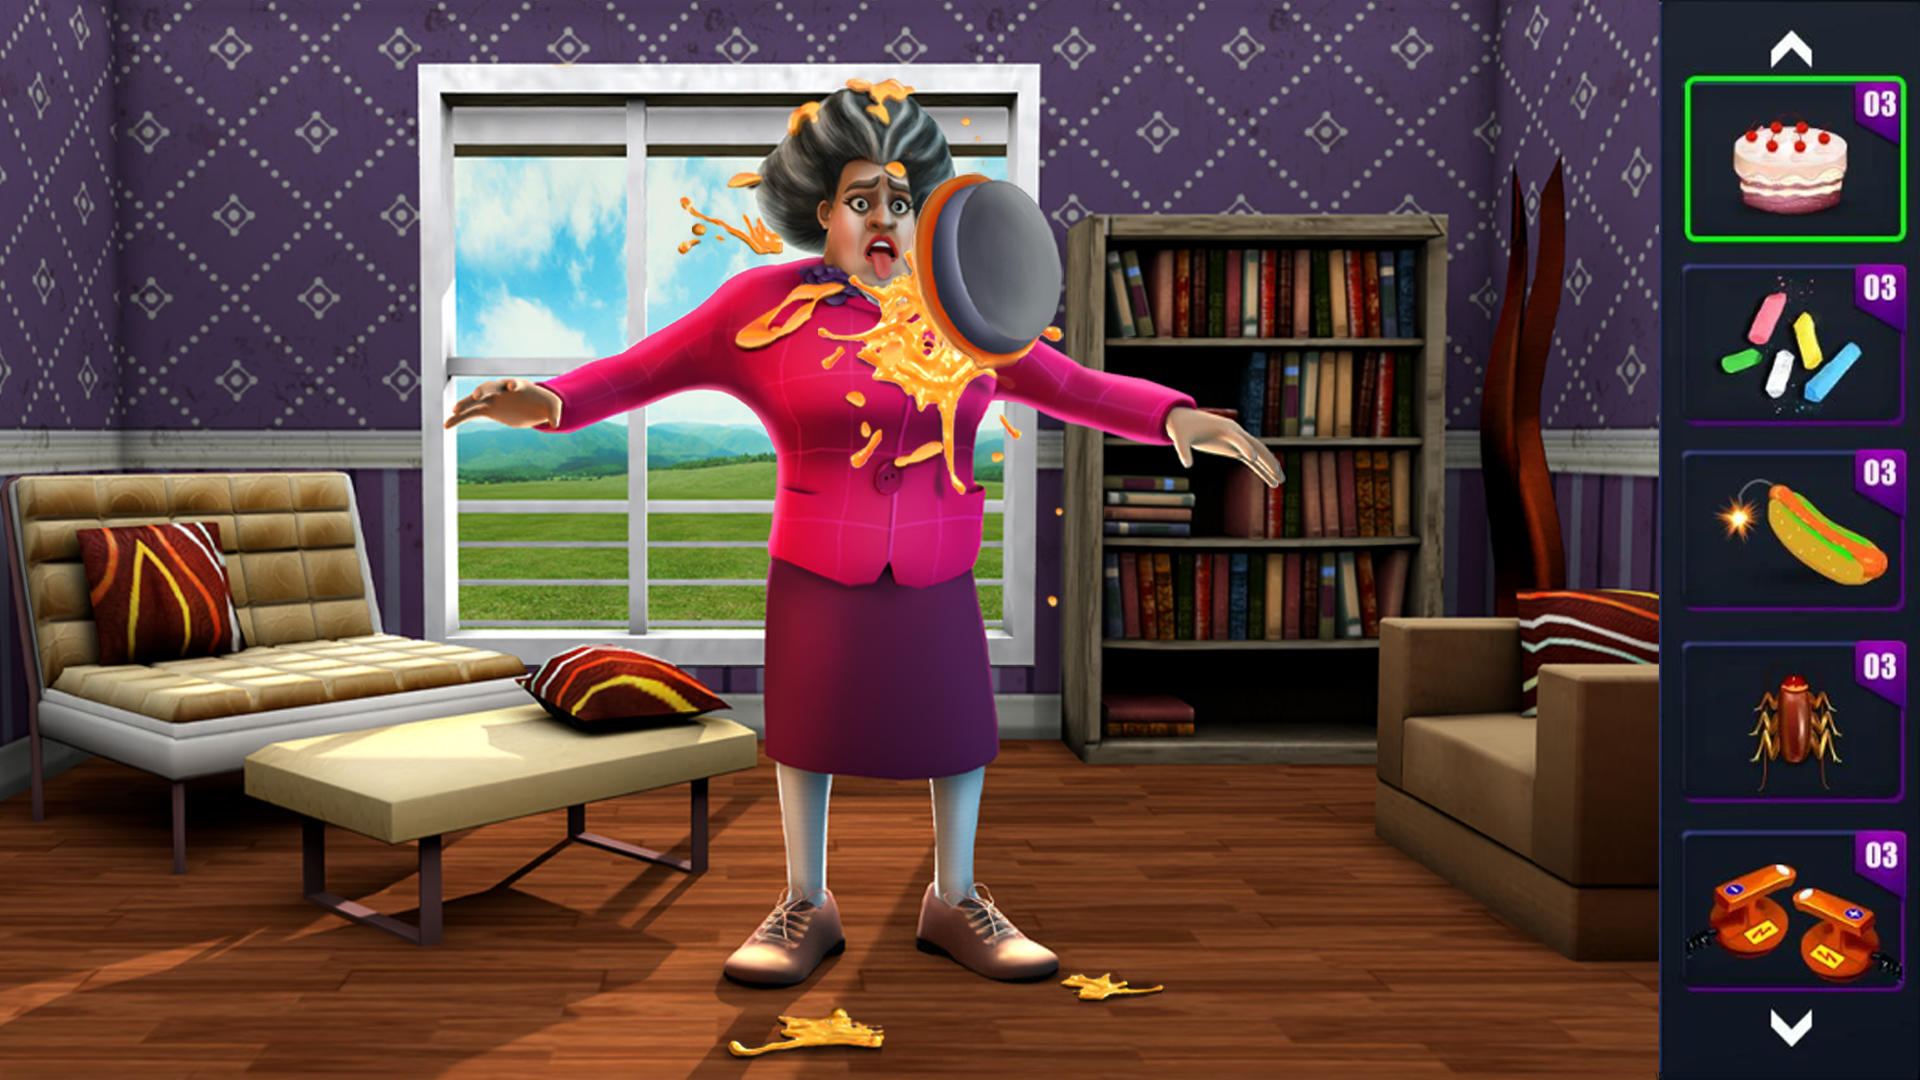 Scary Teacher 3D APK (Unlimited Money) Download For Android